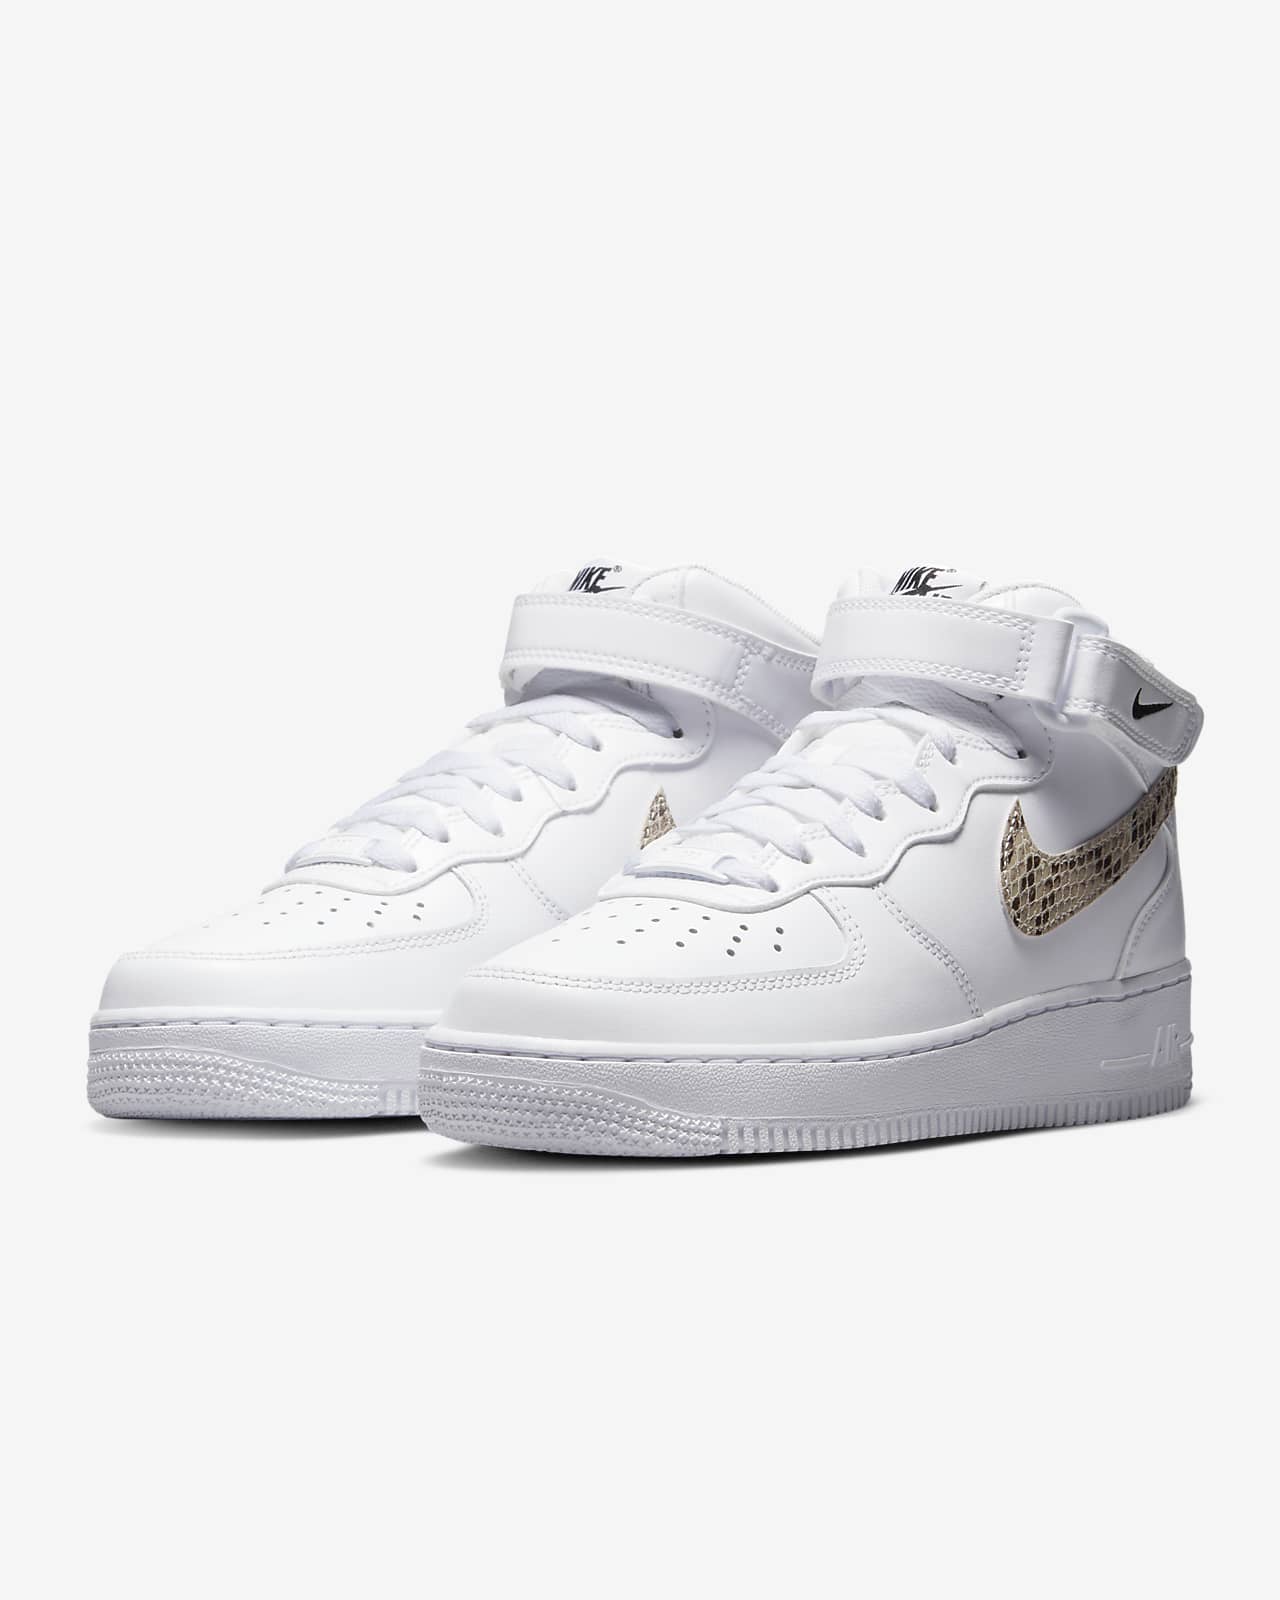 Nike Wmns Air Force 1 07 Mid White - Size 6 Women